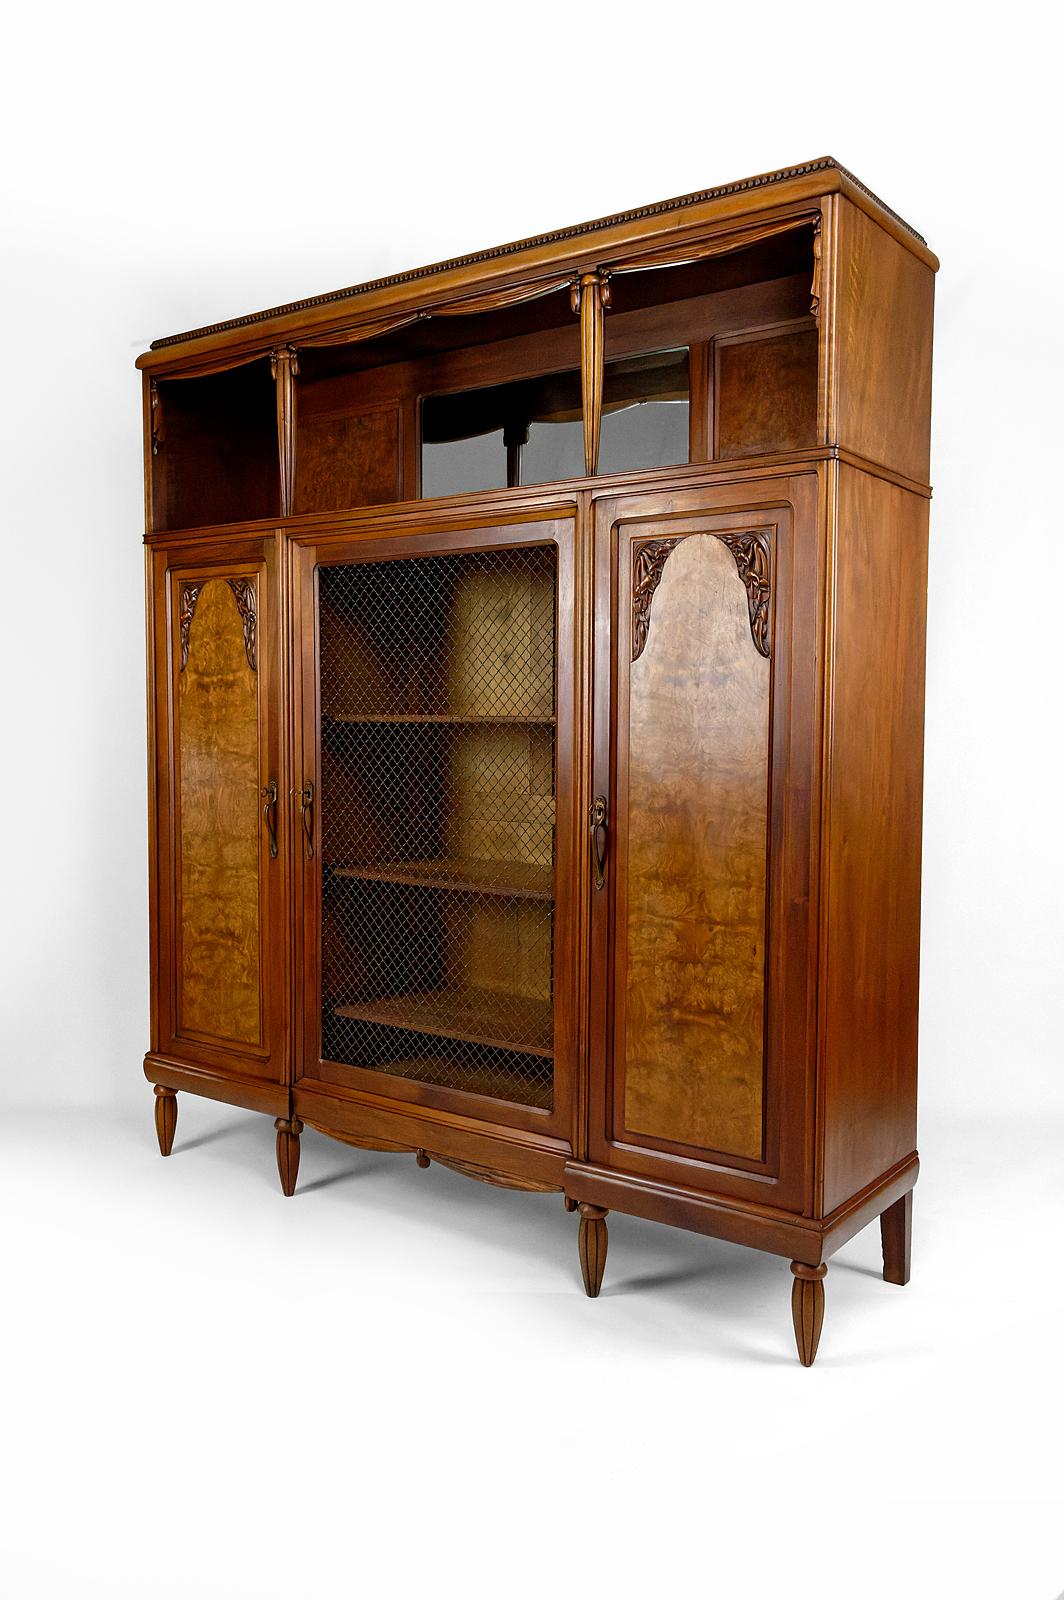 Beveled Art Deco bookcase / cabinet / display case in carved walnut, France, circa 1925